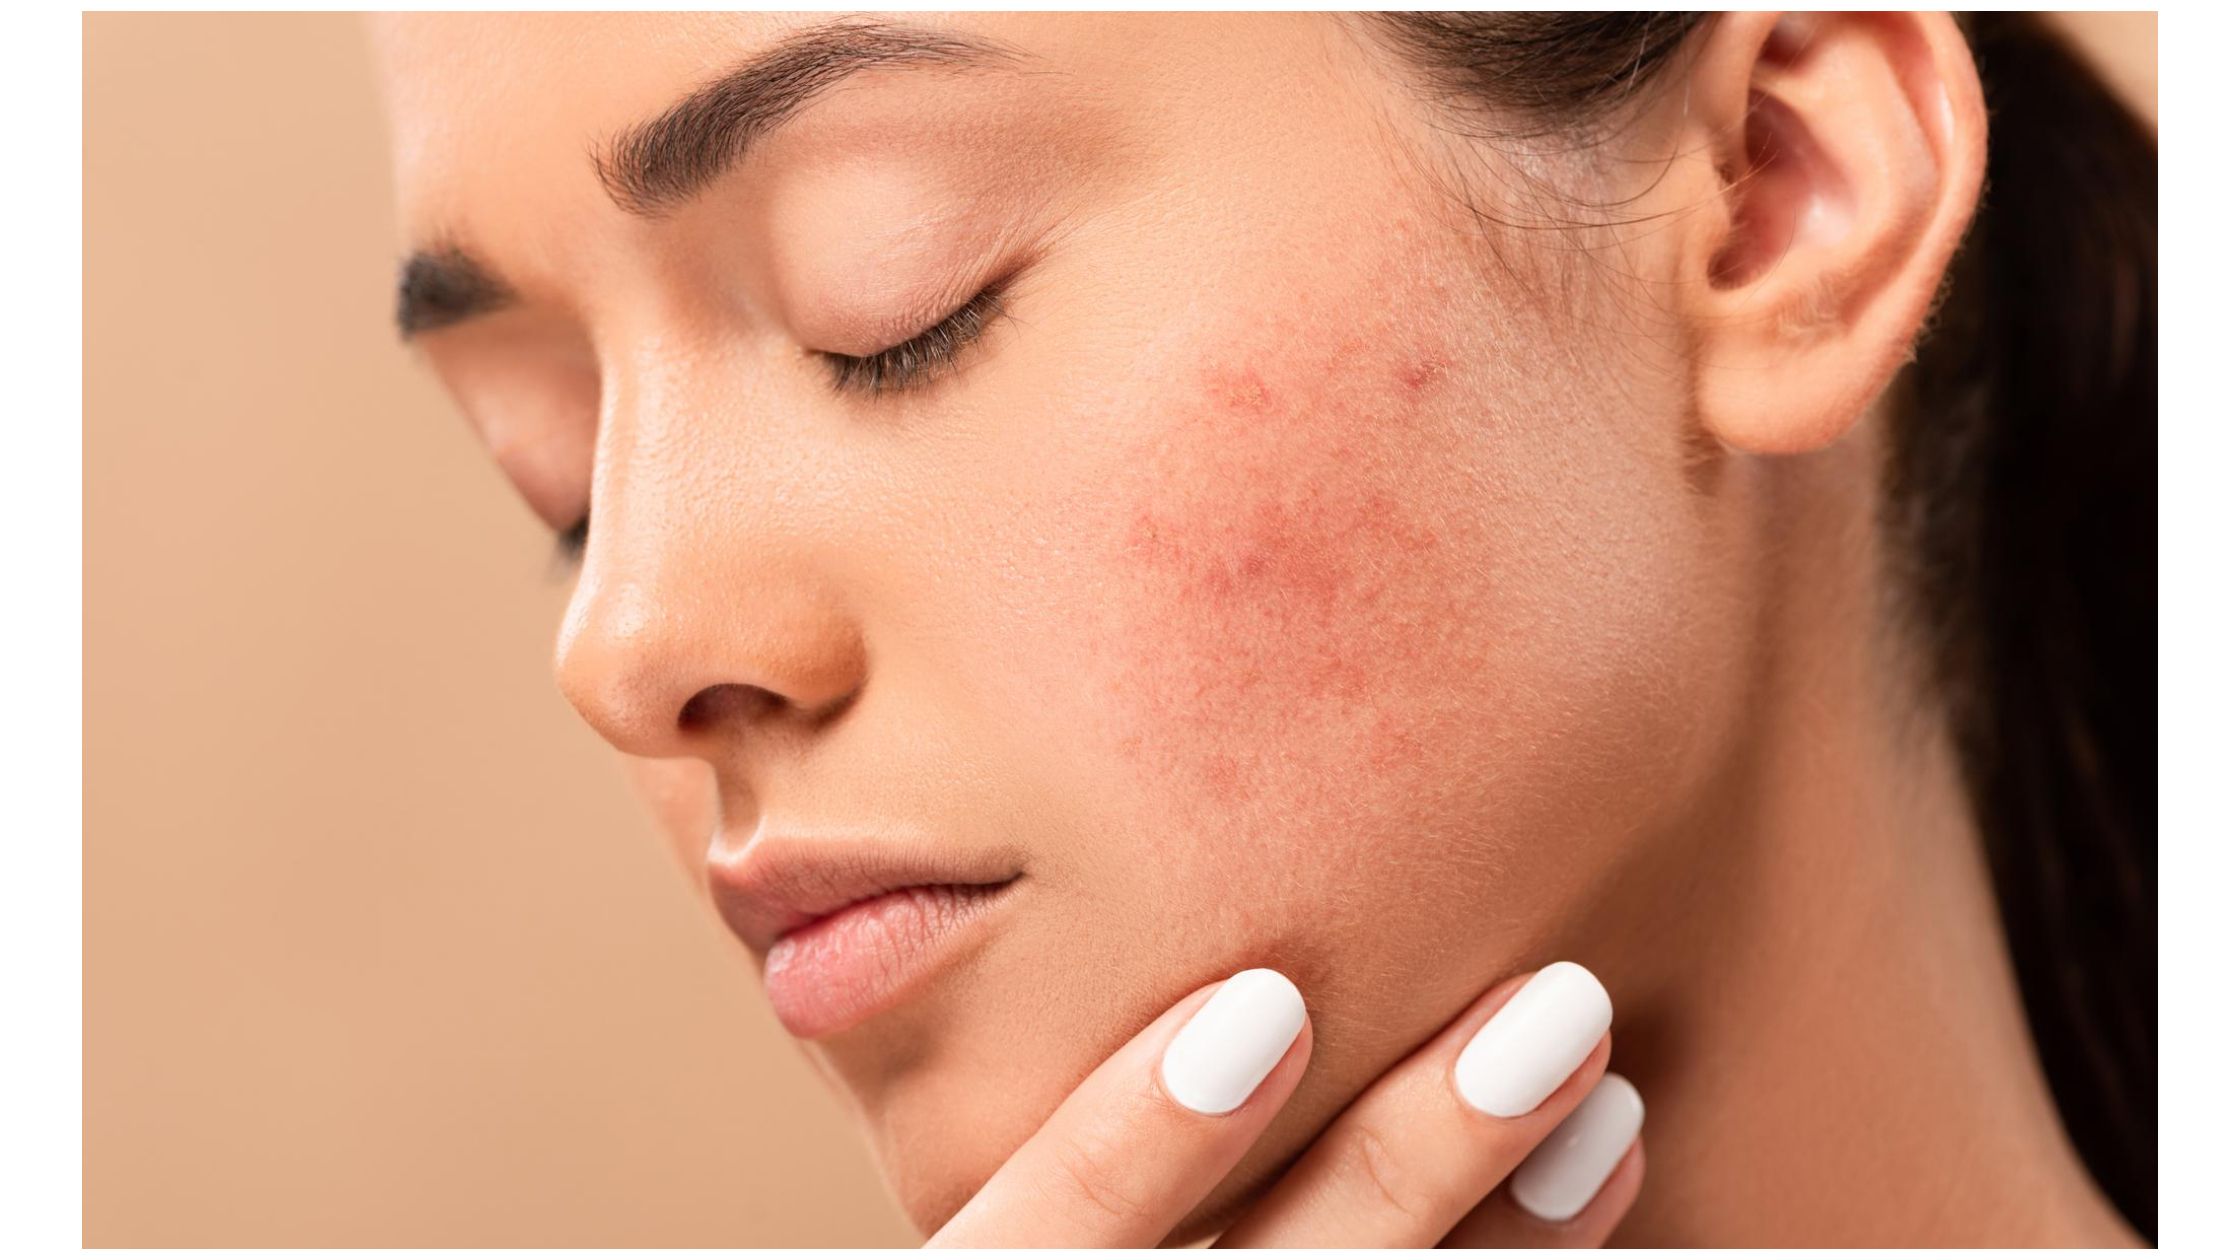 how to remove dark spots on face caused by pimples naturally